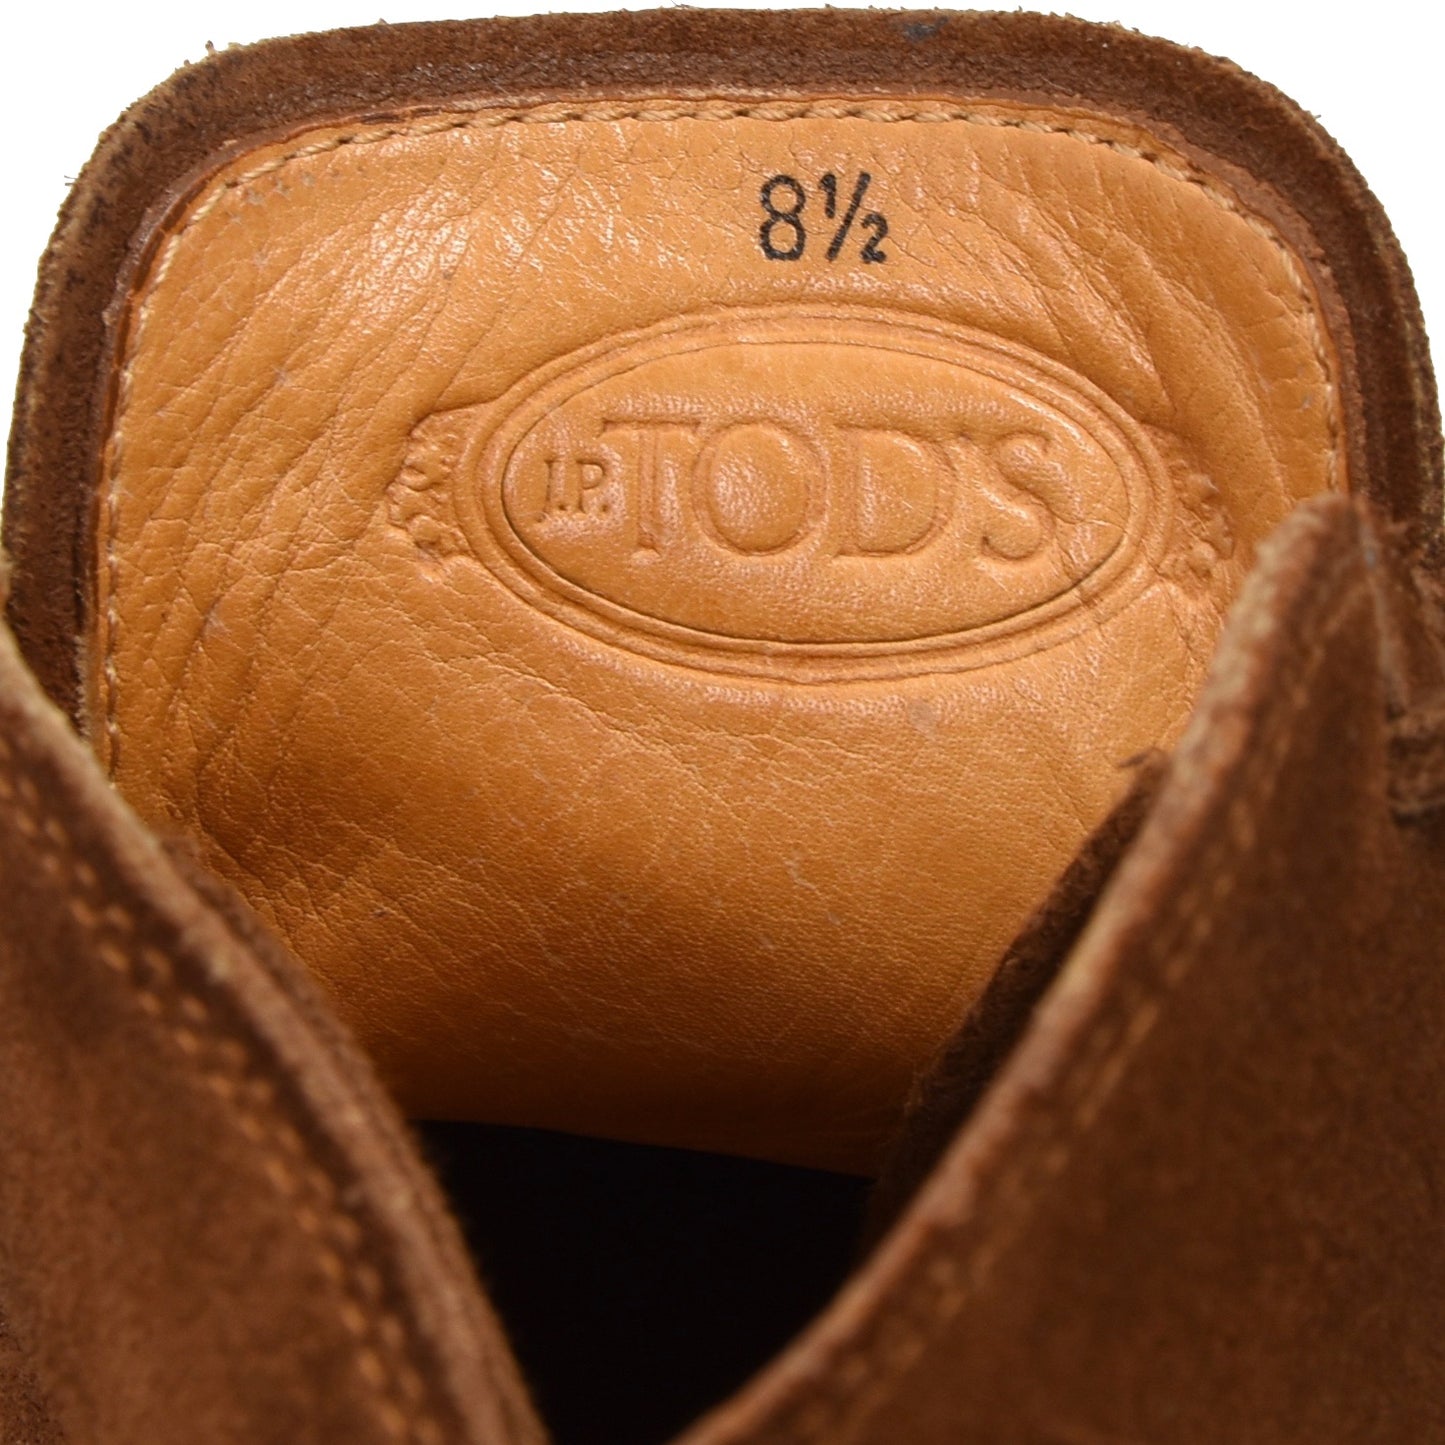 Tod's Boots Size 8.5 - Tobacco Brown